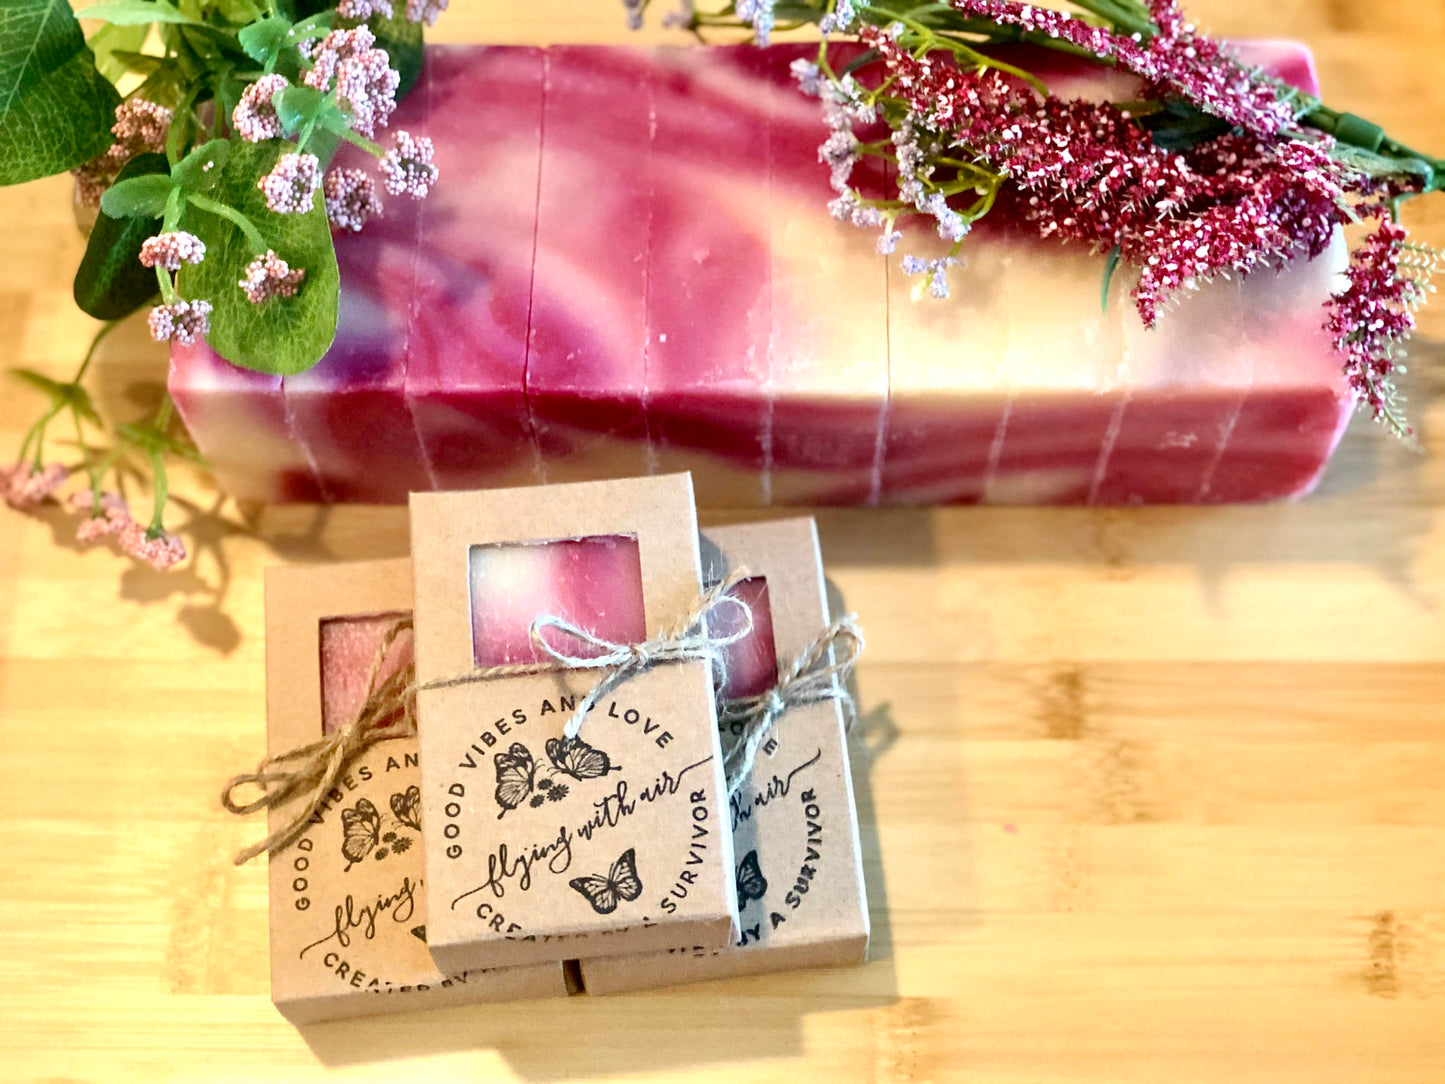 Hand Crafted Organic Herbal Soap Gift Set - Fast Free Shipping Pack of 2 3 5 | Hippie Bohemian Birthday Mother's Day Christmas Gift for Her